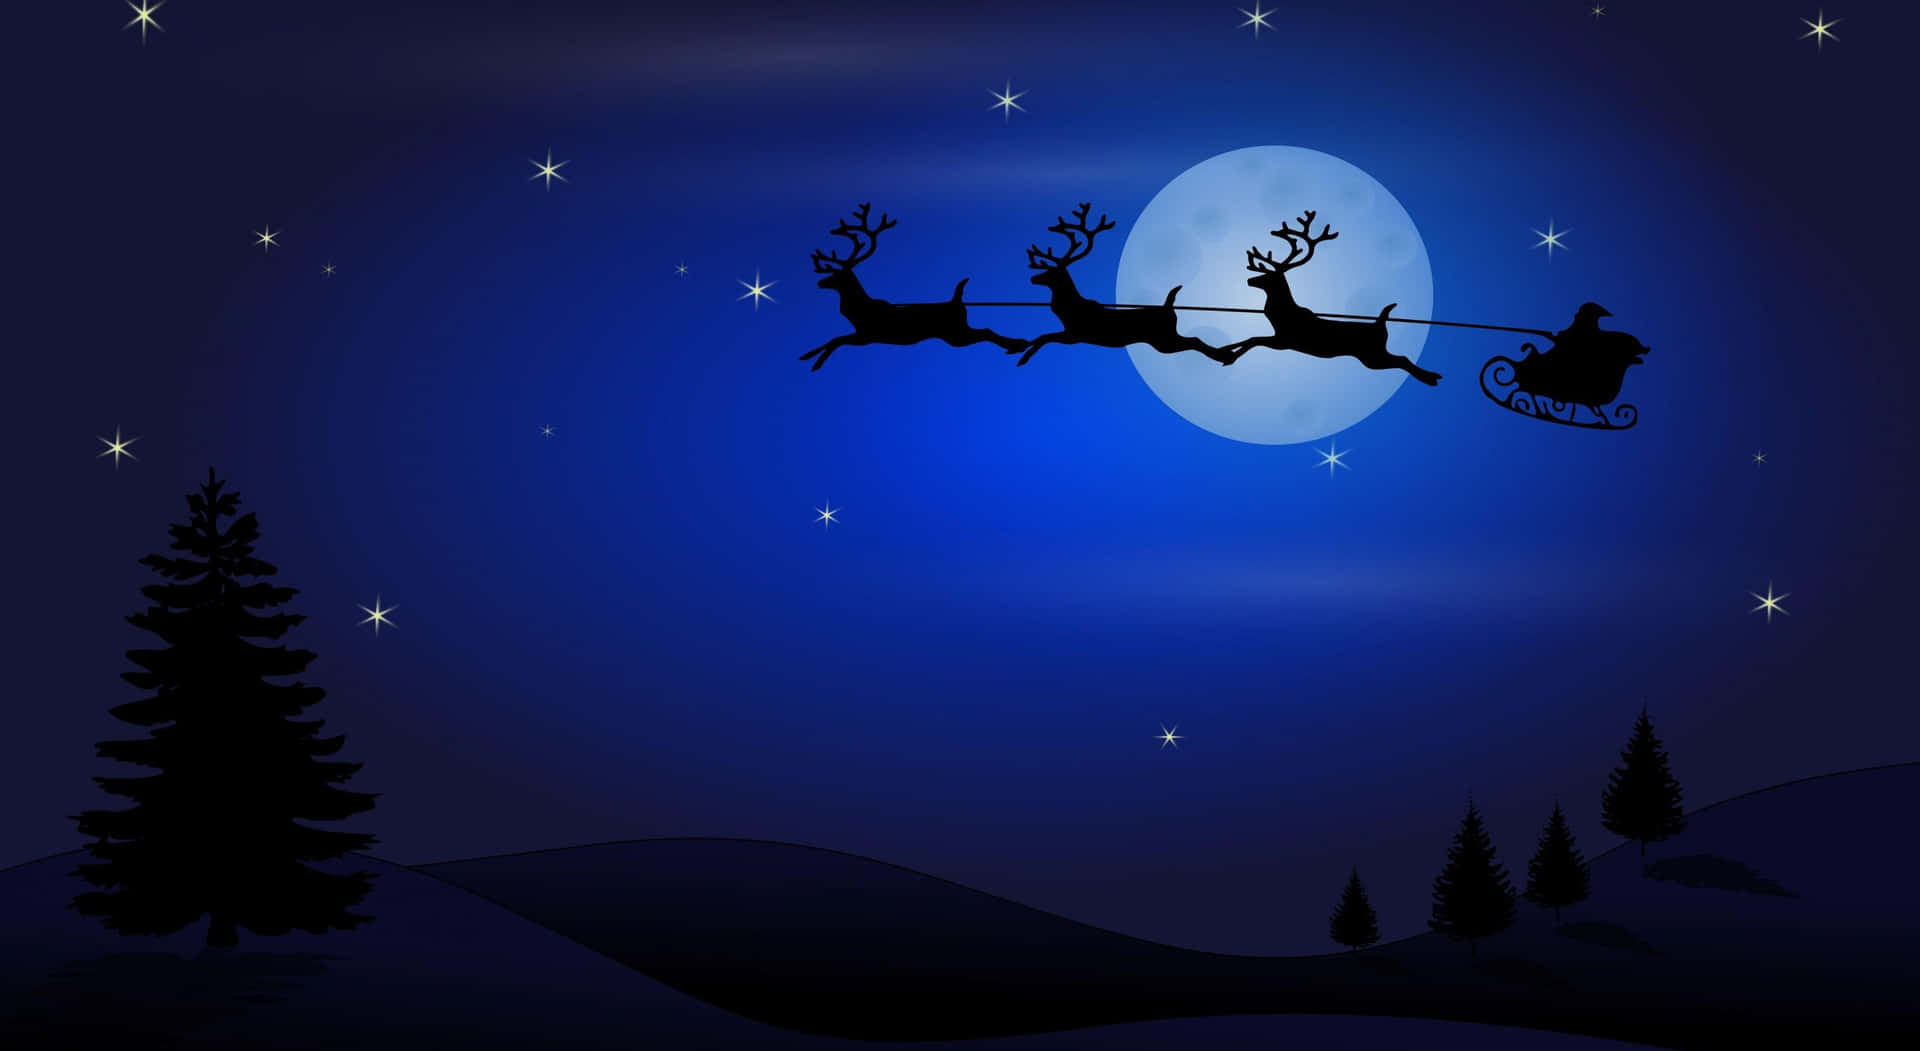 Make your Christmas dreams come true this night! Wallpaper